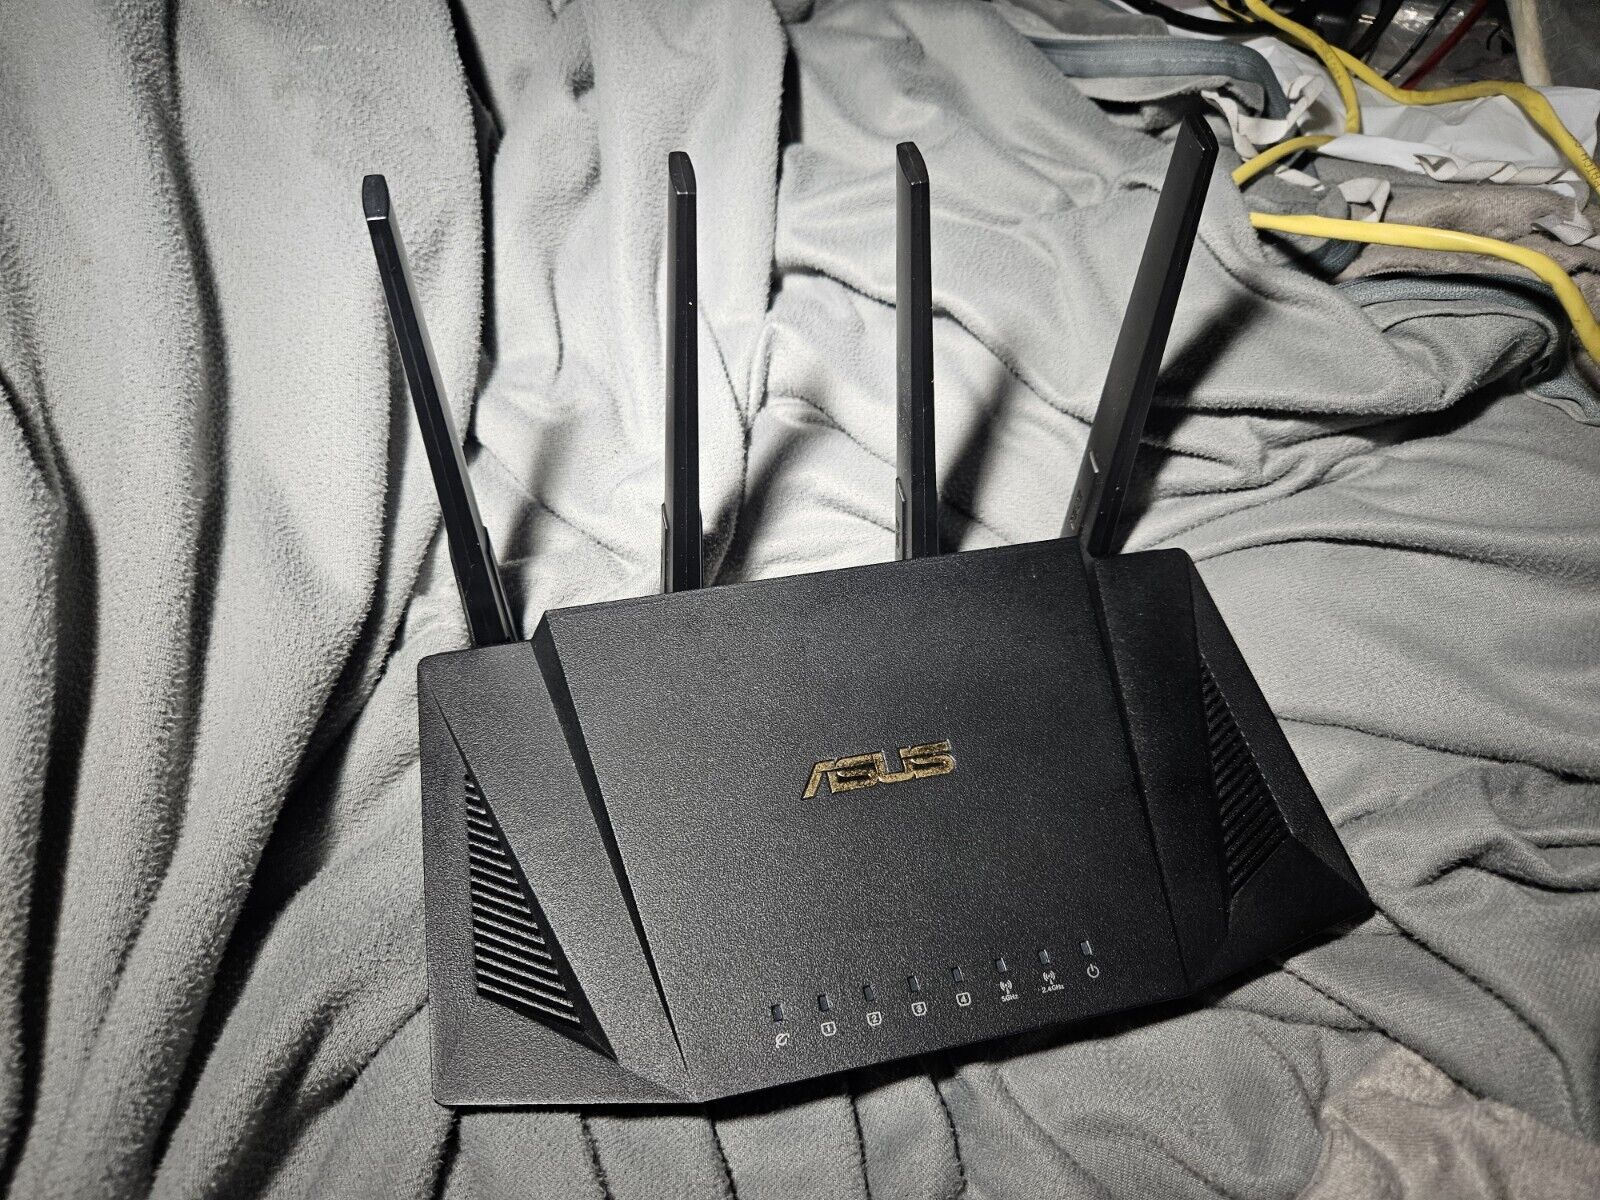 ASUS RT-AX3000 Dual-Band Wi-Fi Router